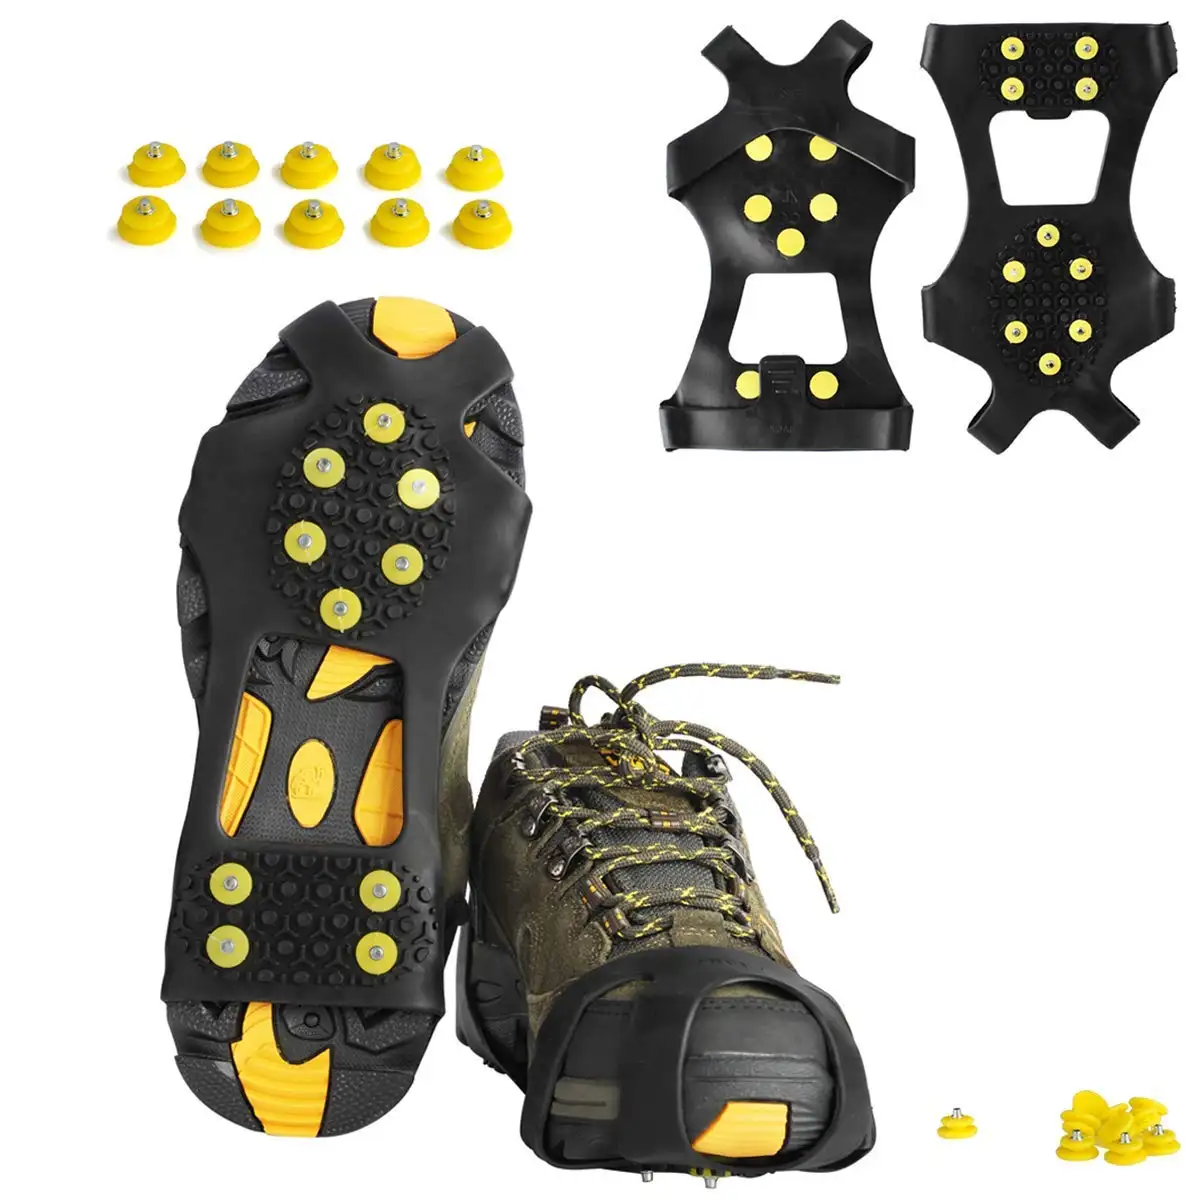 10 Steel anti slip Studs ice Cleats Snow silicone Shoe Spikes Crampons for Hiking Shoes